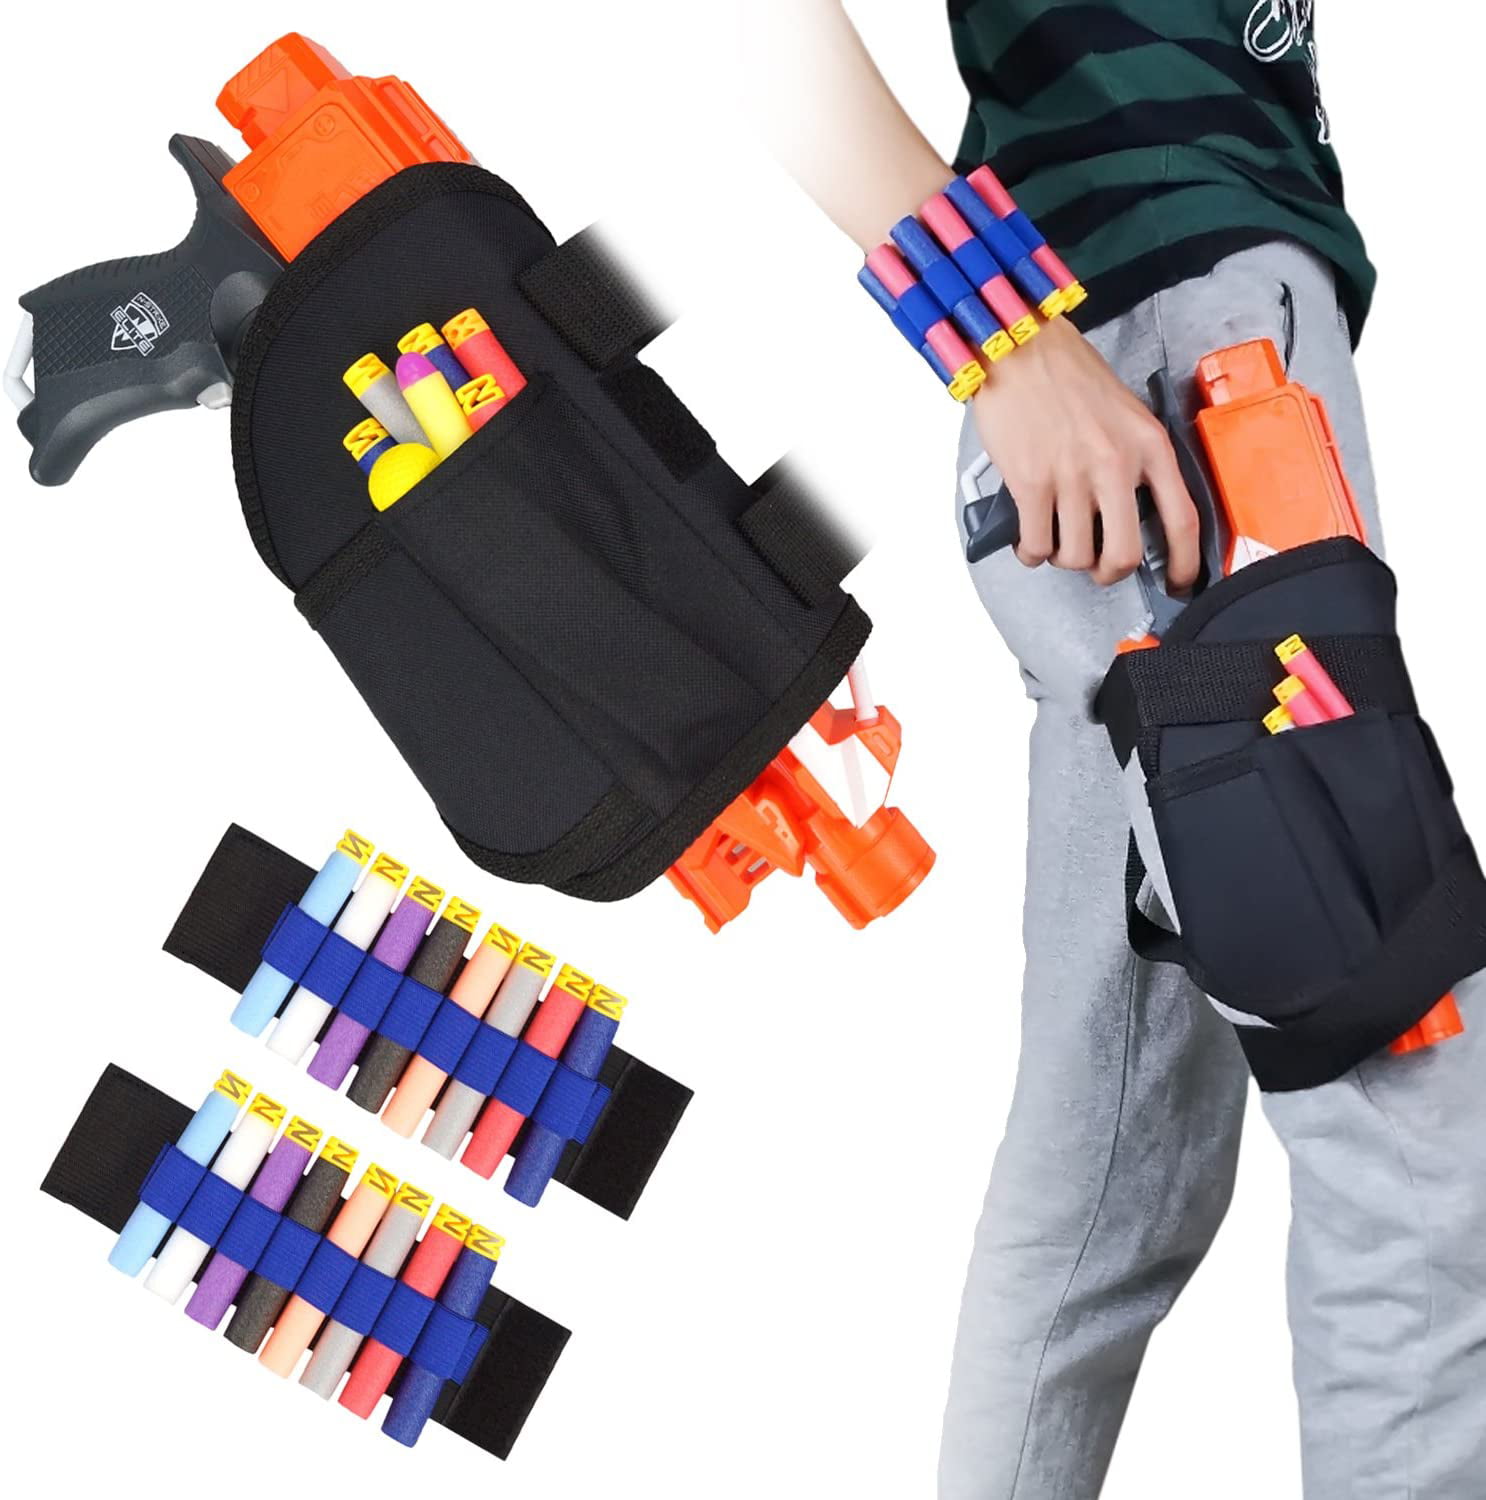 Nerf Rival Tactical Strap Pouch Toy Gun Blaster For Foam Bullet Balls Ammo Gift